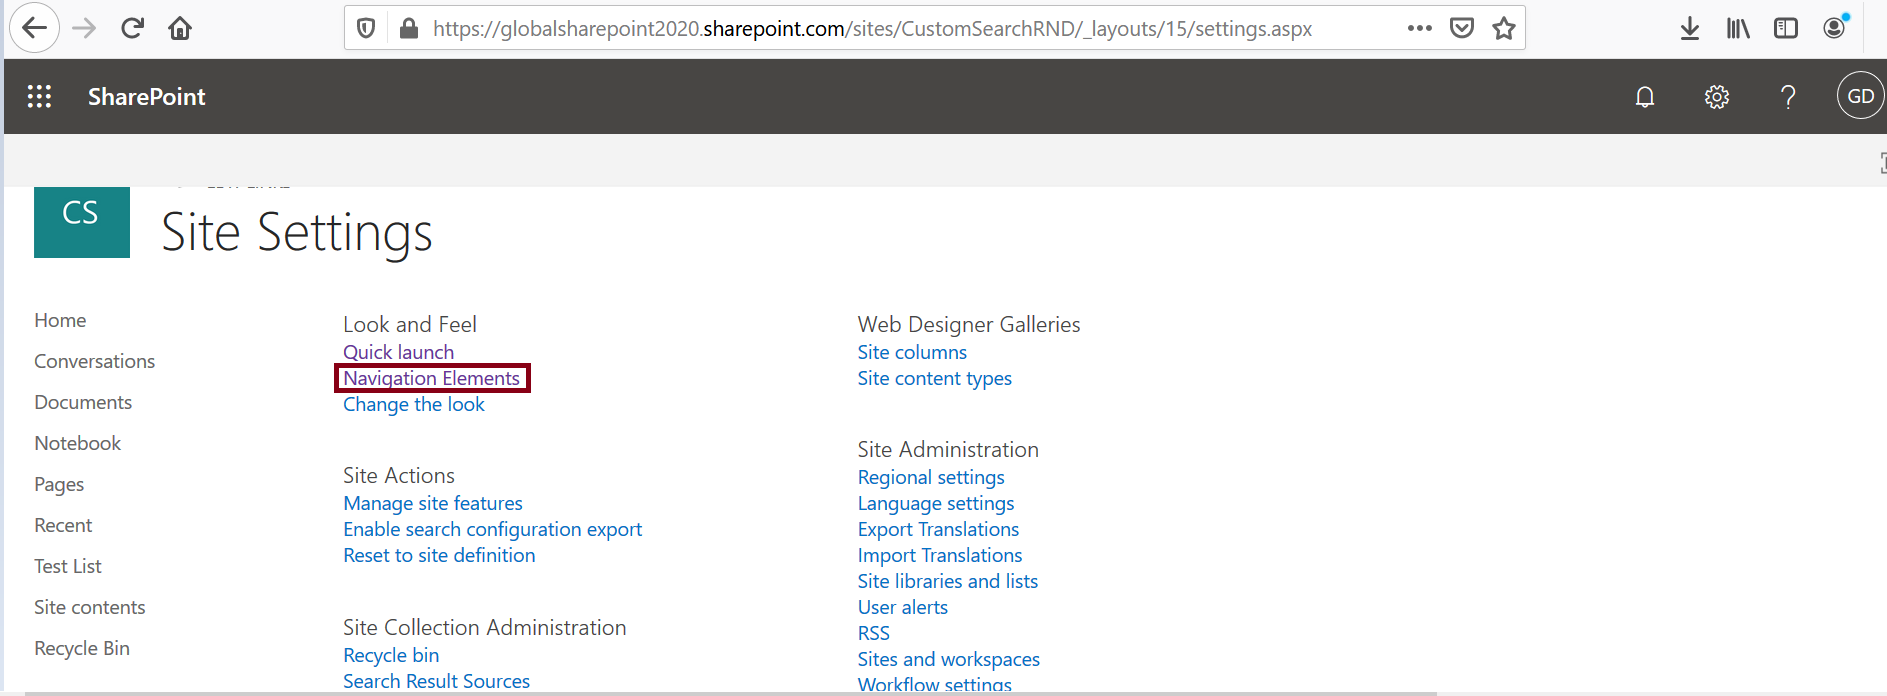 Navigation elements in site settings page - SharePoint look and feel